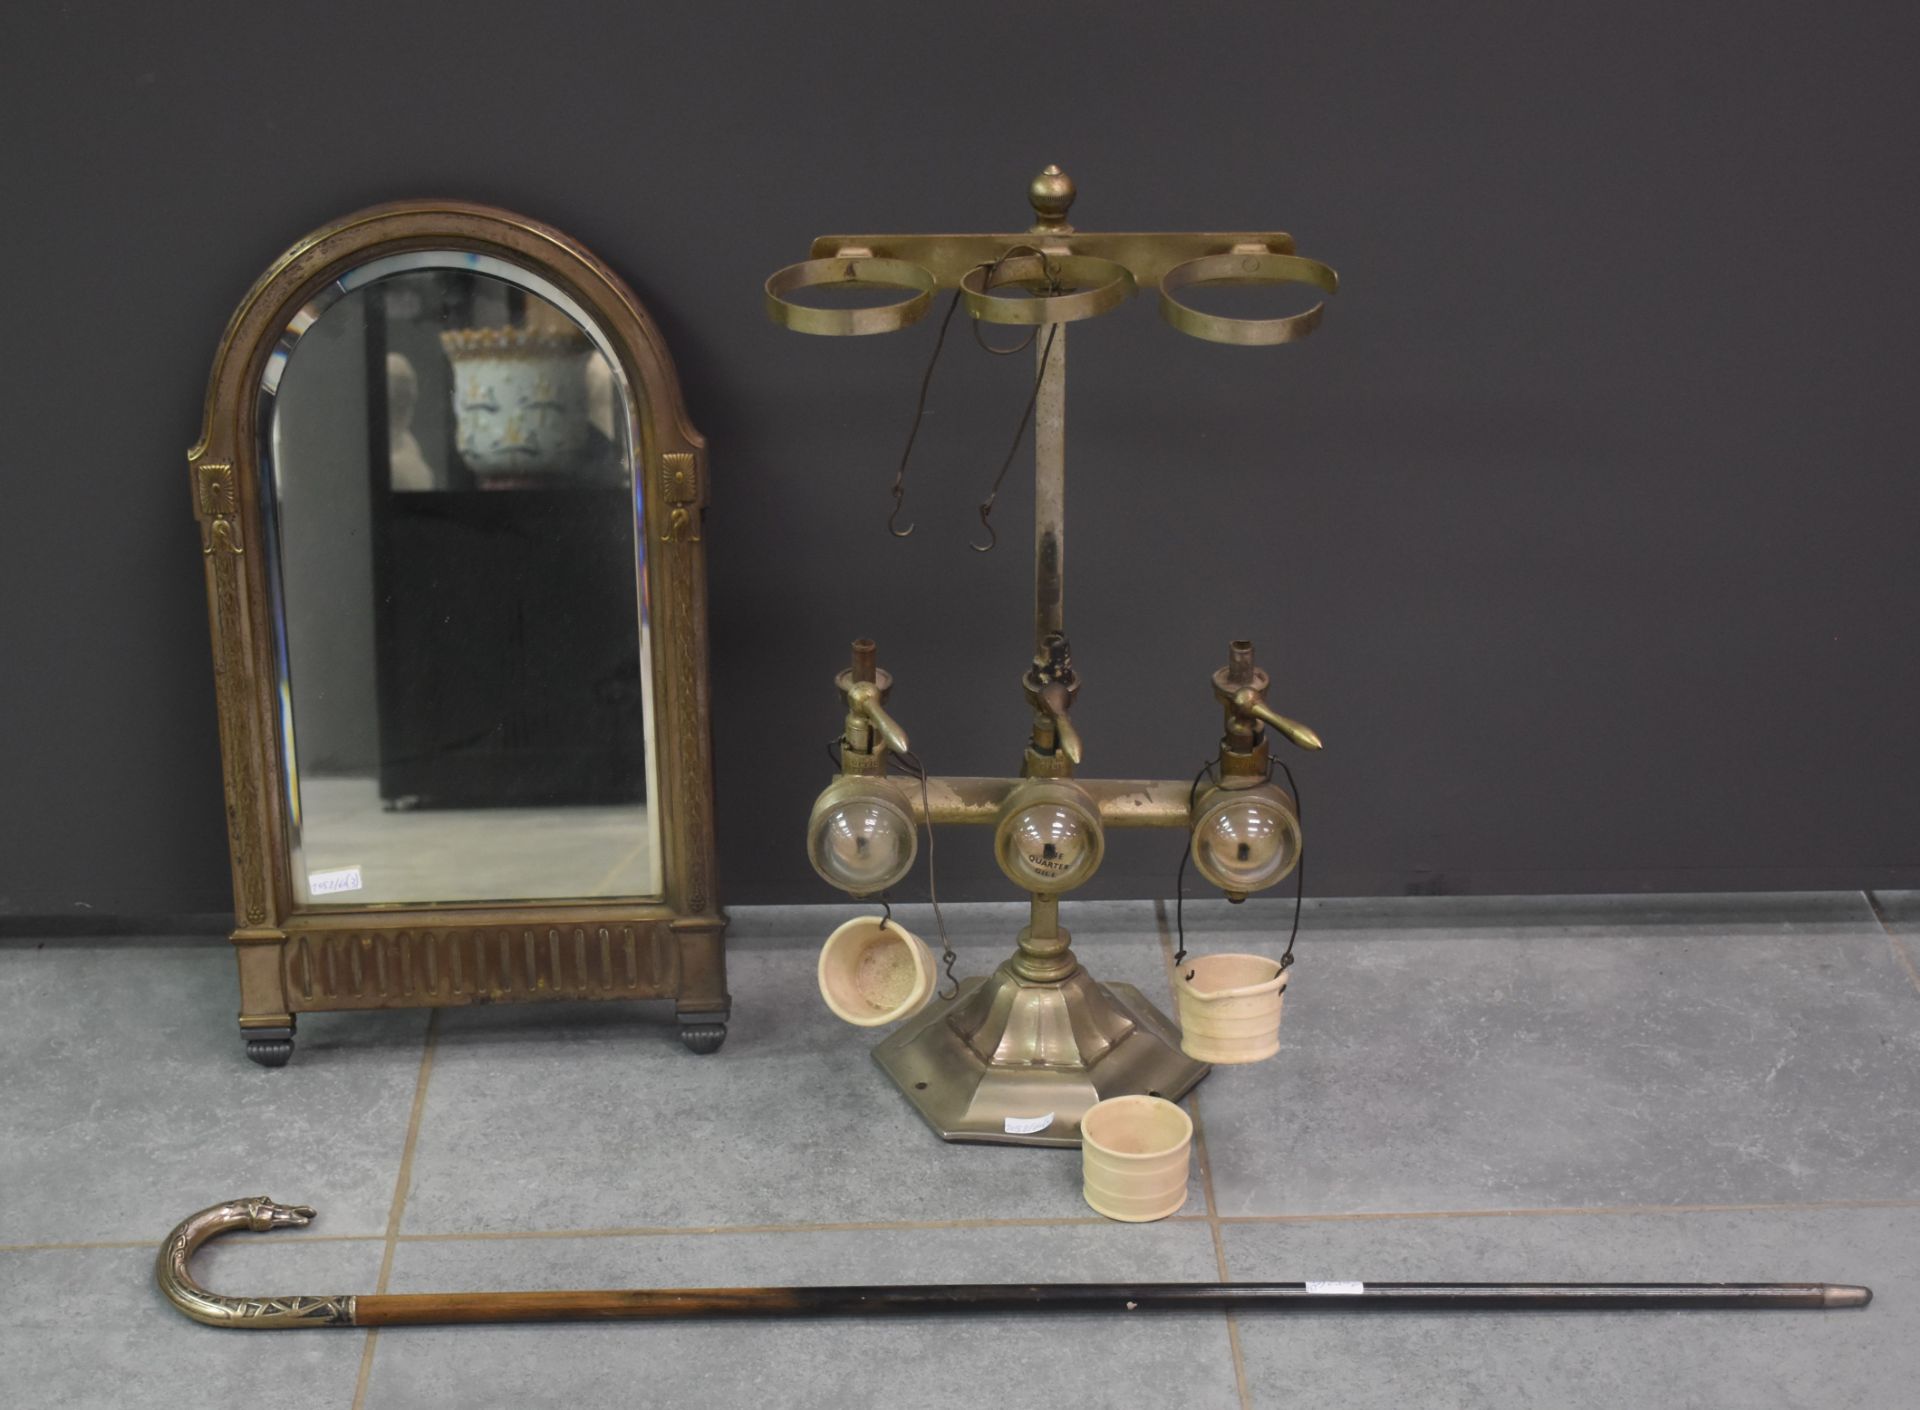 Lot varia including a cane whose stick forms a horse's head, an art deco metal mirror and a bar foun